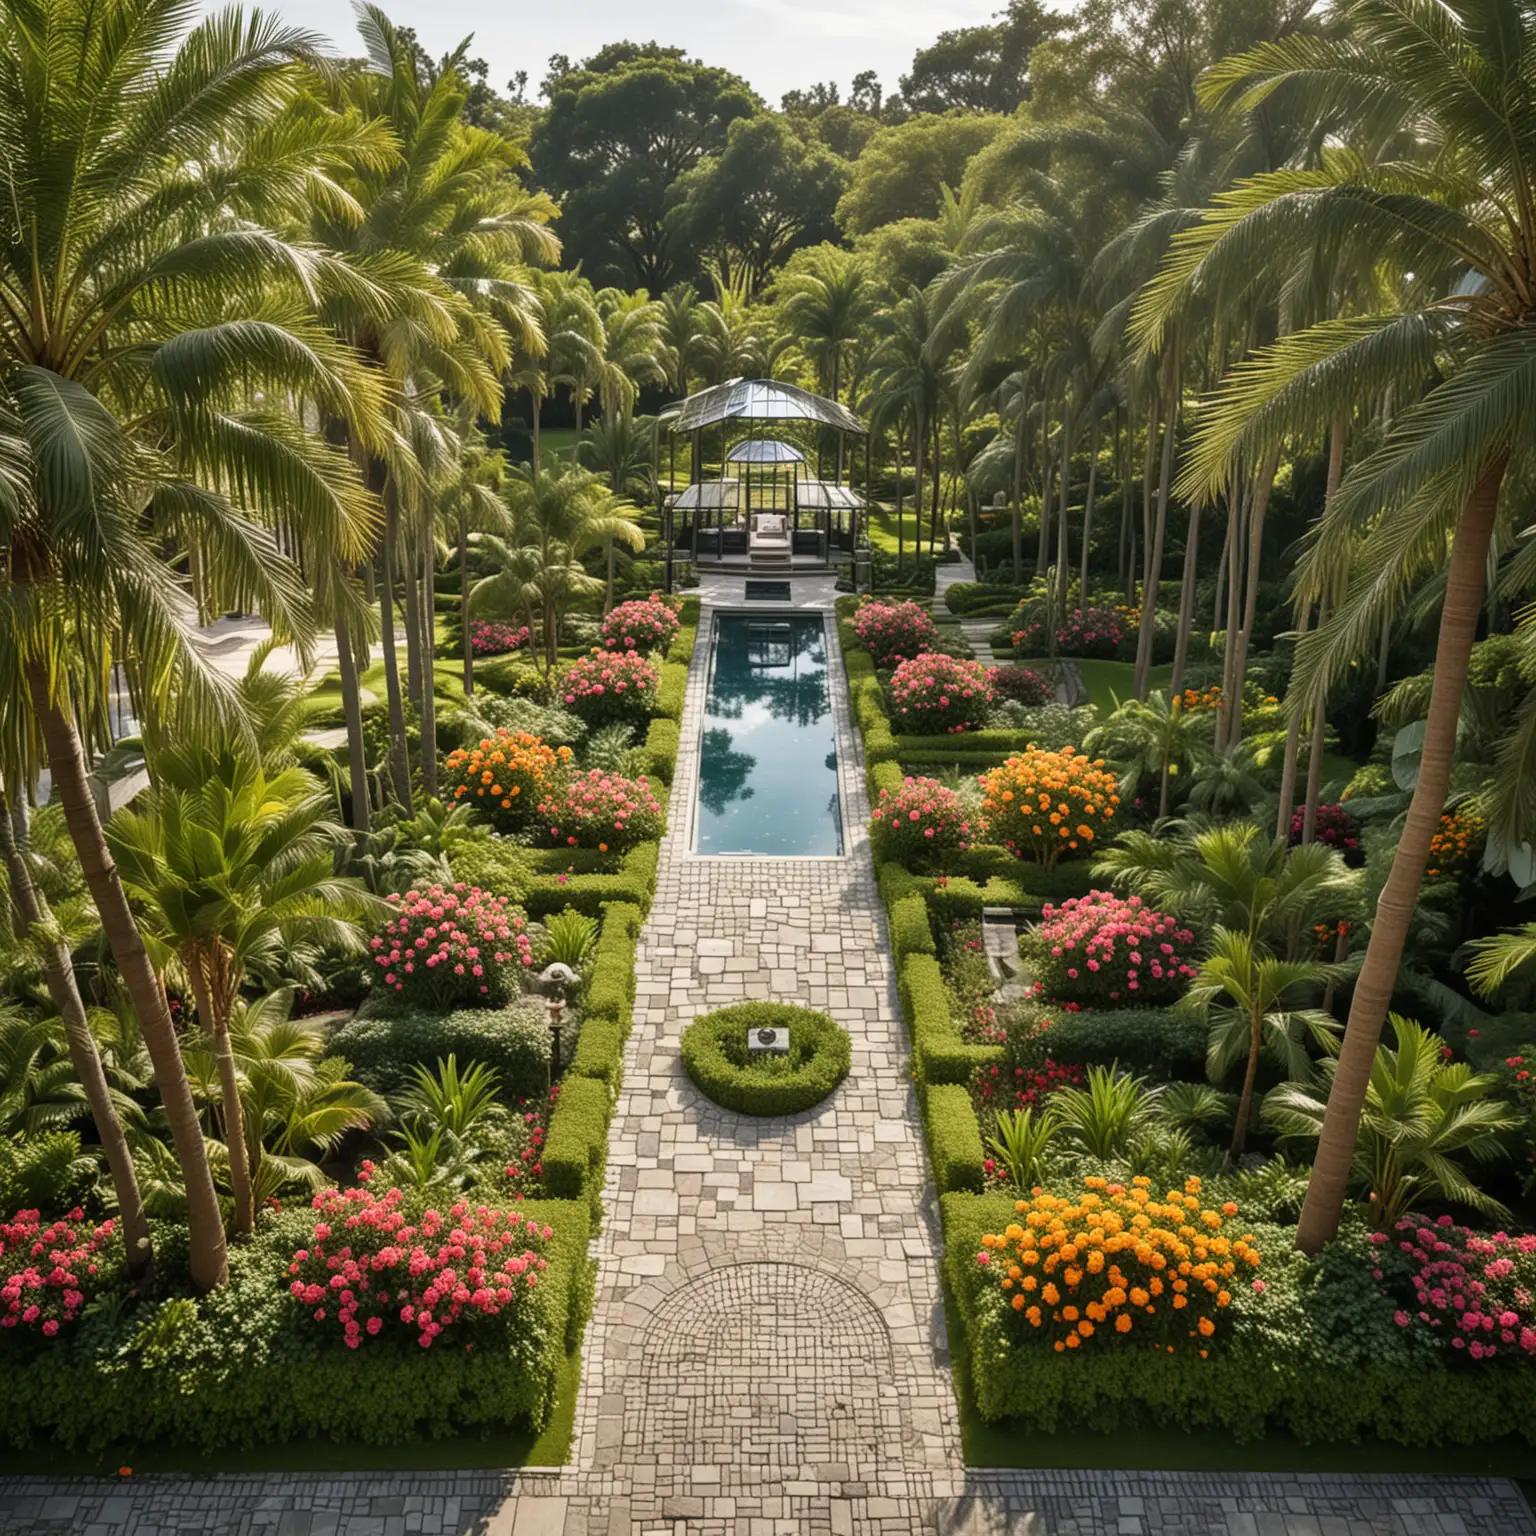 aRIEL shot of  a sprawling modern garden with a central axis leading to a large reflecting pool surrounded by manicured lawns and tall, tropical palm trees. Incorporate multiple zones, including a formal rose garden, a shaded bamboo grove, and an orchard of citrus trees. The garden features wide stone pathways and a grand wrought iron gate at the entrance. Adjacent to the garden is a luxurious container mansion with expansive glass walls, allowing for uninterrupted views of the landscape. The scene is set on a sunny spring afternoon, with vibrant floral colors and lush greenery enhanced by strategically placed solar-powered lighting.